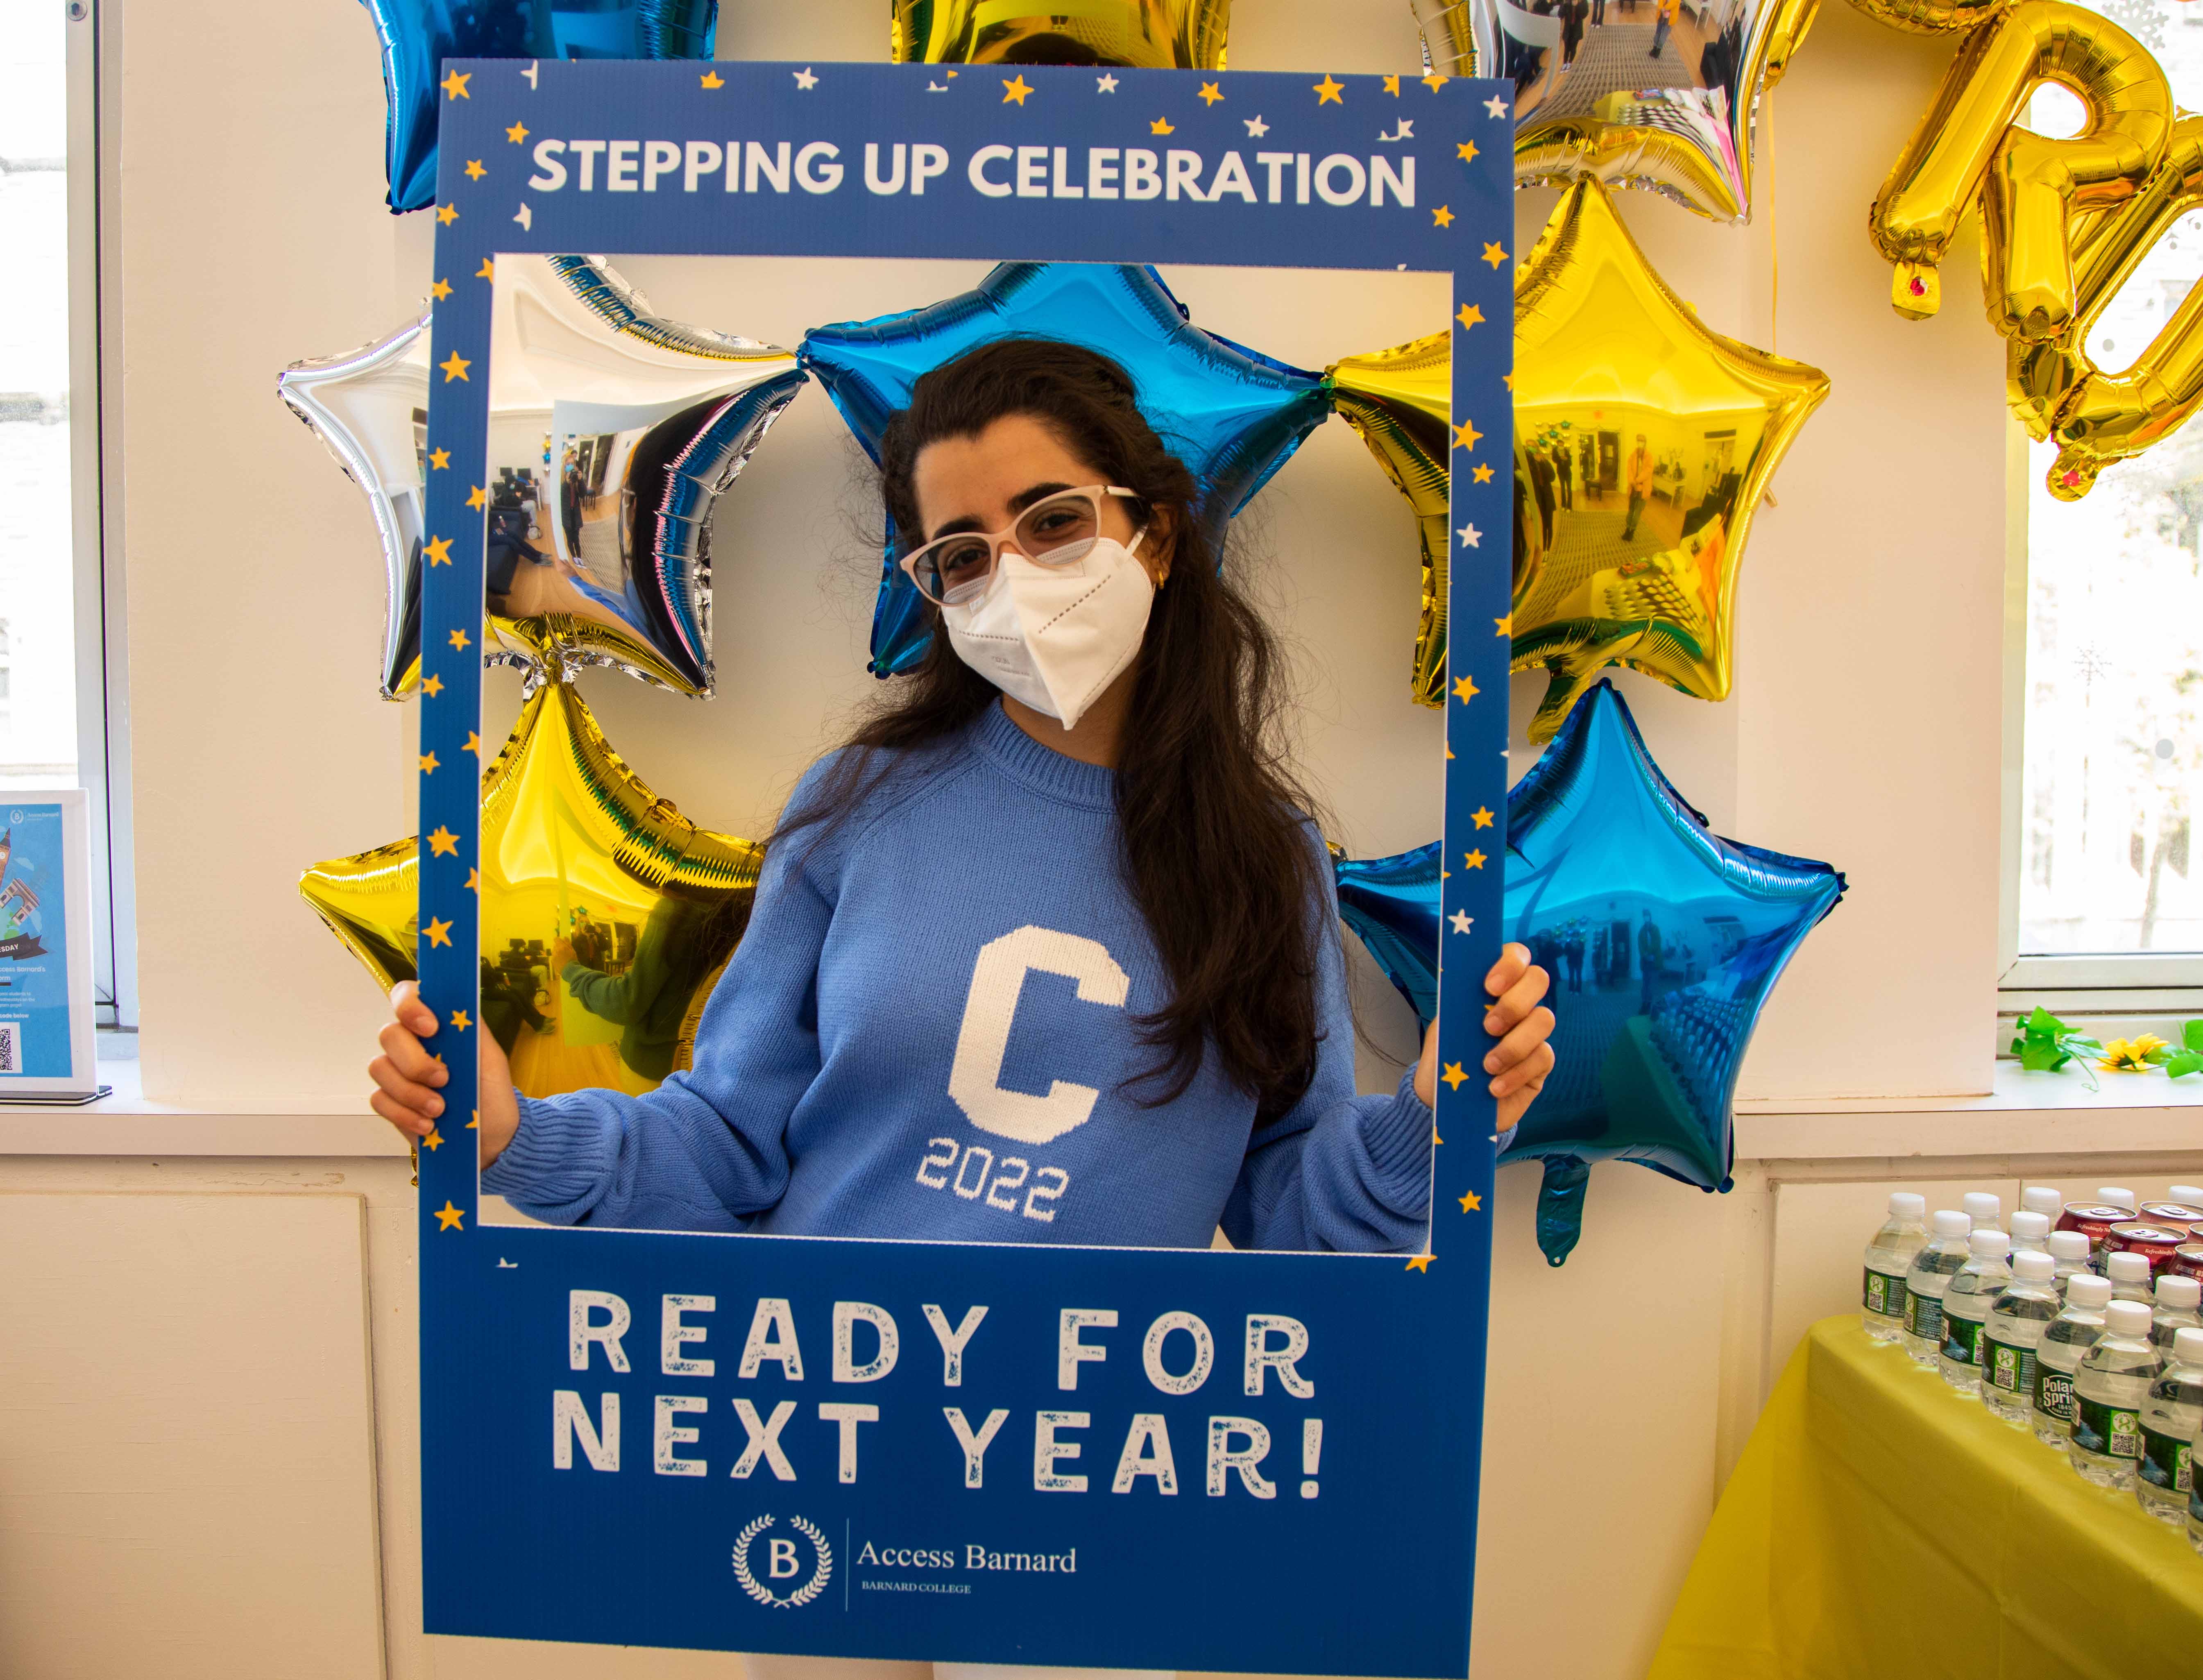 Student at the Access Barnard Celebration holding a blue cardboard cutout around herself that says, "Ready for next year!"